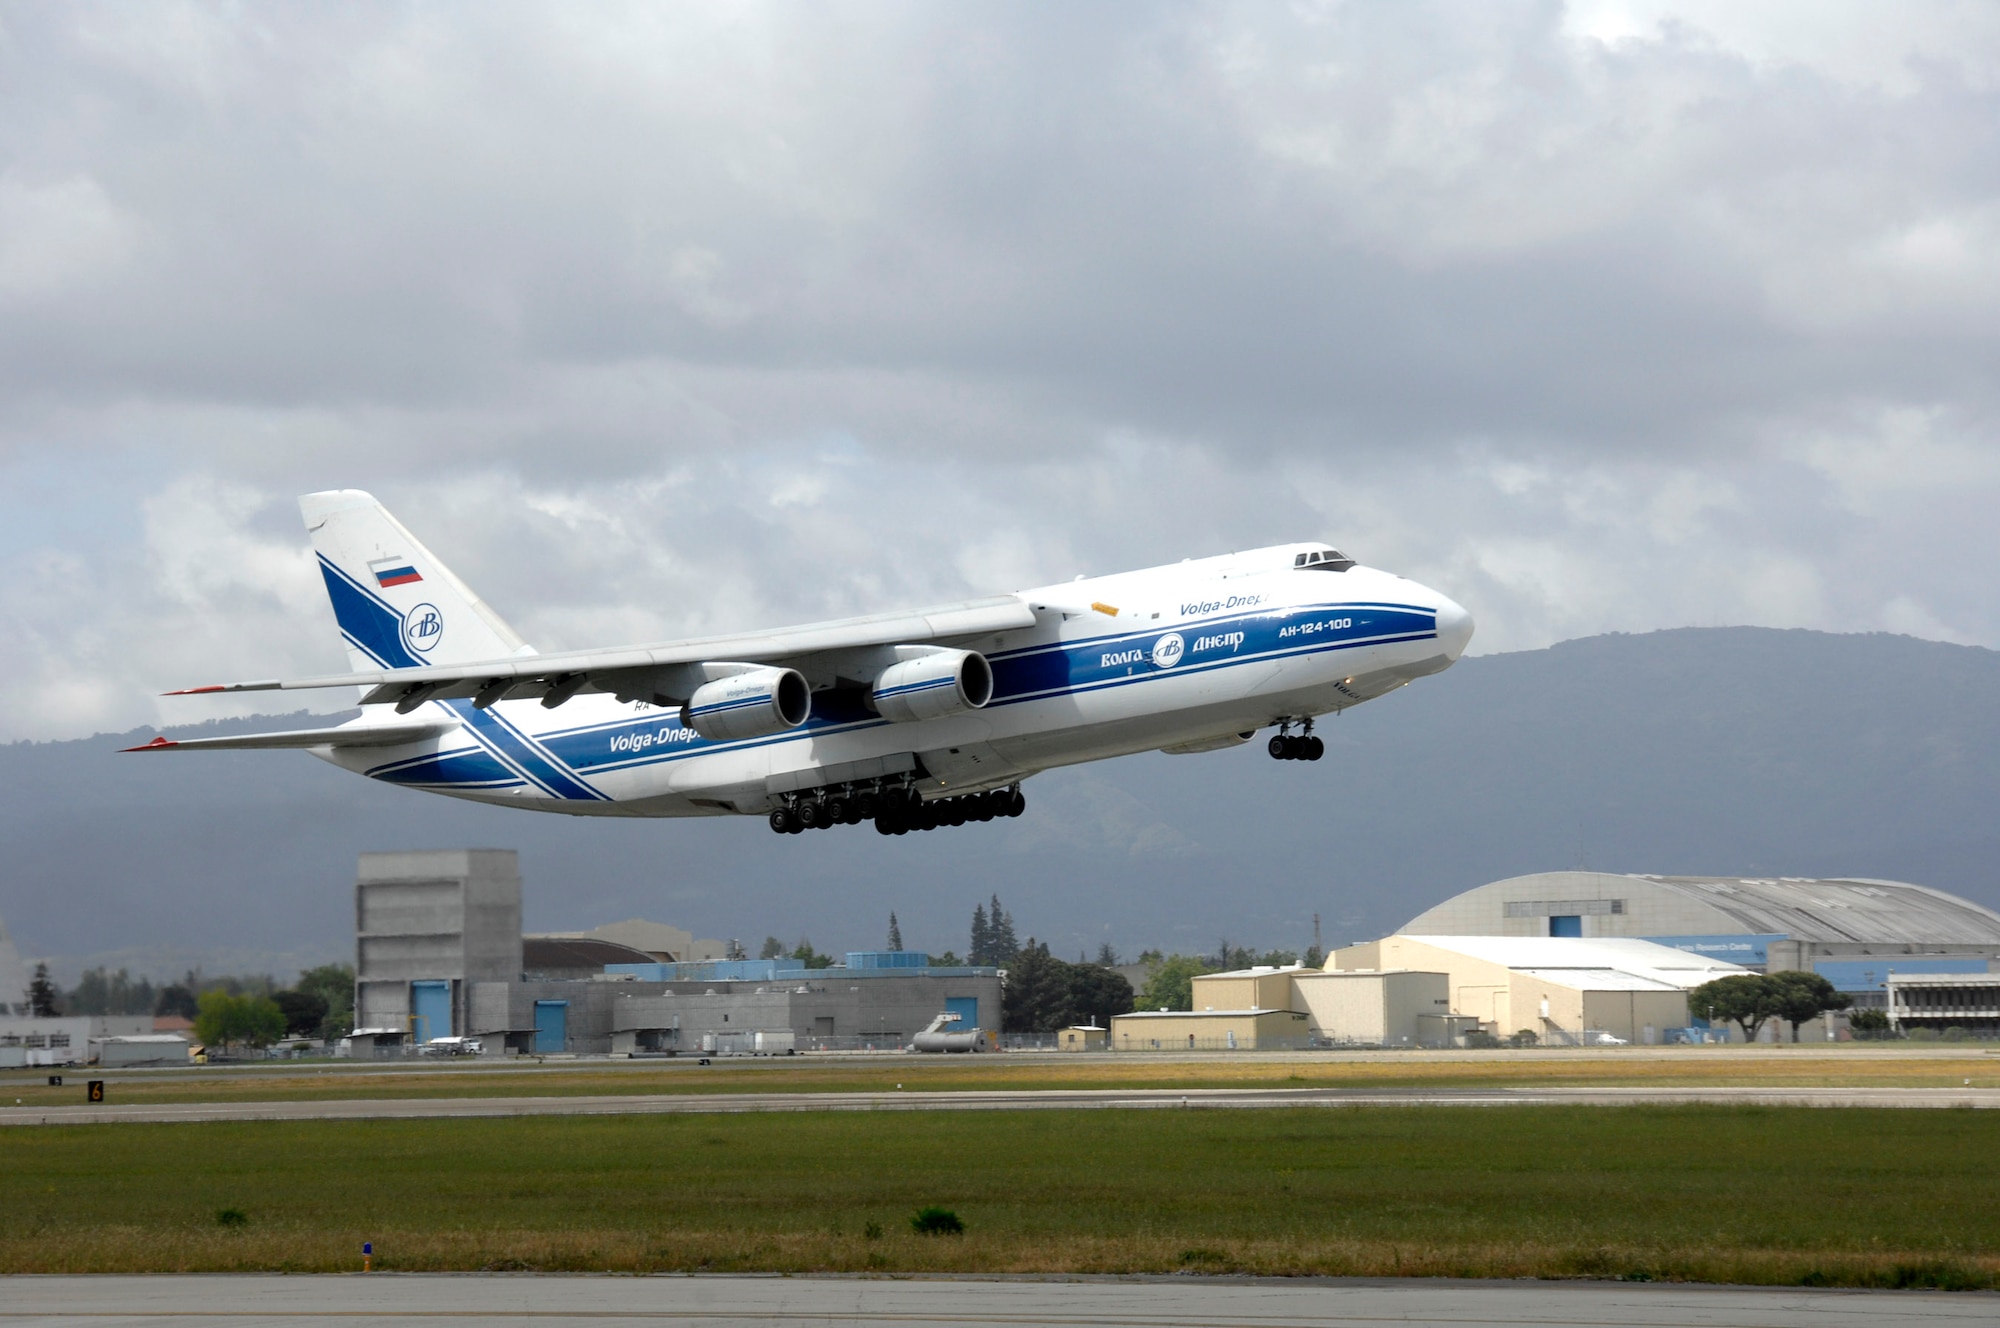 A Russian Volga-Dnepr AN-124 long-range heavy transport aircraft takes off from Moffett Federal Airfield, Calif., April 22. The contracted AN-124 transported 129th Rescue Wing deployment cargo to Afghanistan because the high operations tempos of Operations Iraqi Freedom and Enduring Freedom have kept C-17 Globemaster III and C-5 Galaxy aircraft fully engaged. (U.S. Air Force photo/Master Sgt. Daniel Kacir)